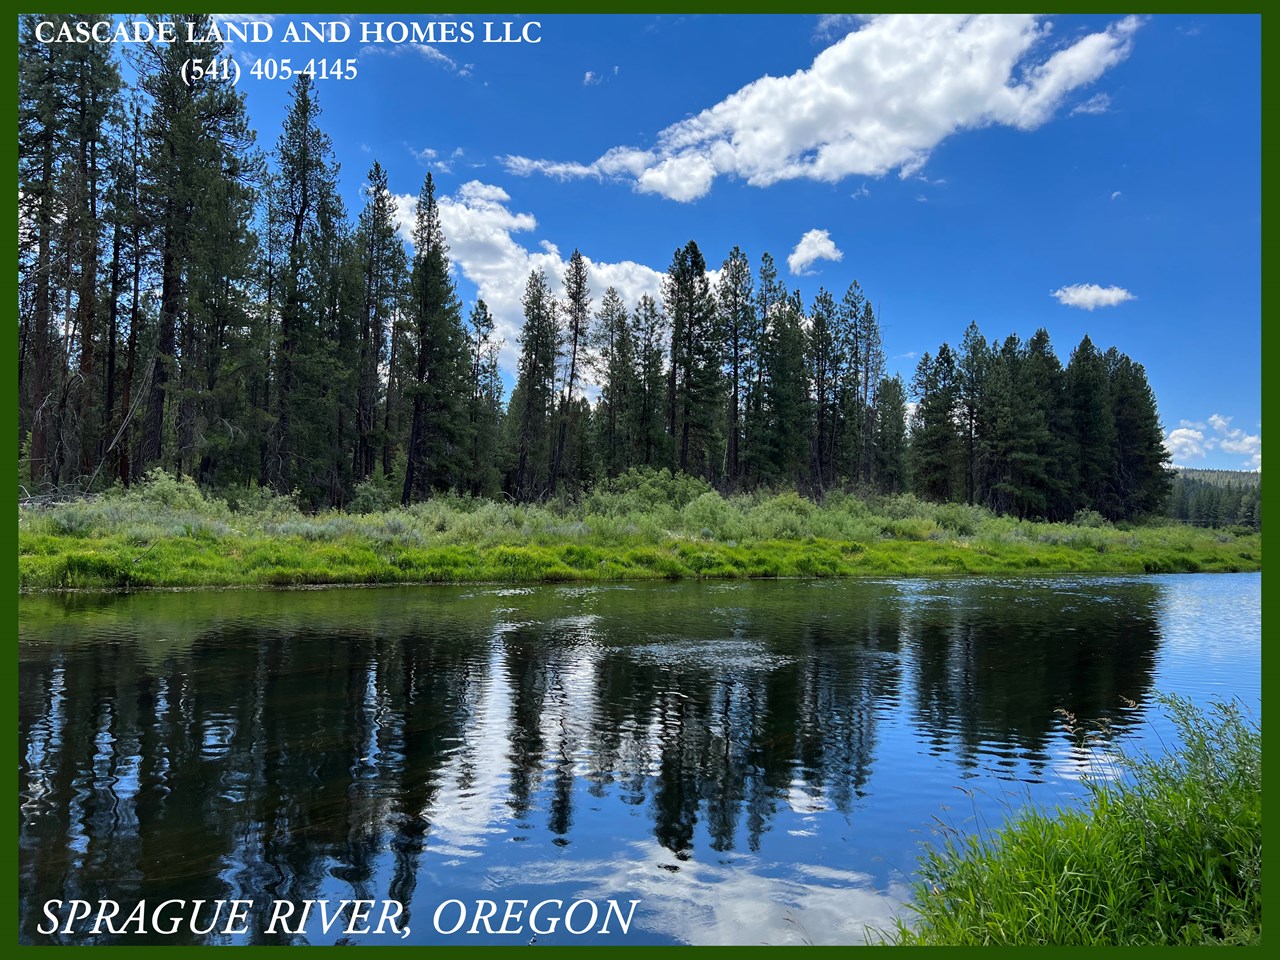 the sprague river is also close by, the recreational opportunities abound here, fishing, boating, swimming, hiking, bird and wildlife watching, there is something for everyone who loves the outdoors!